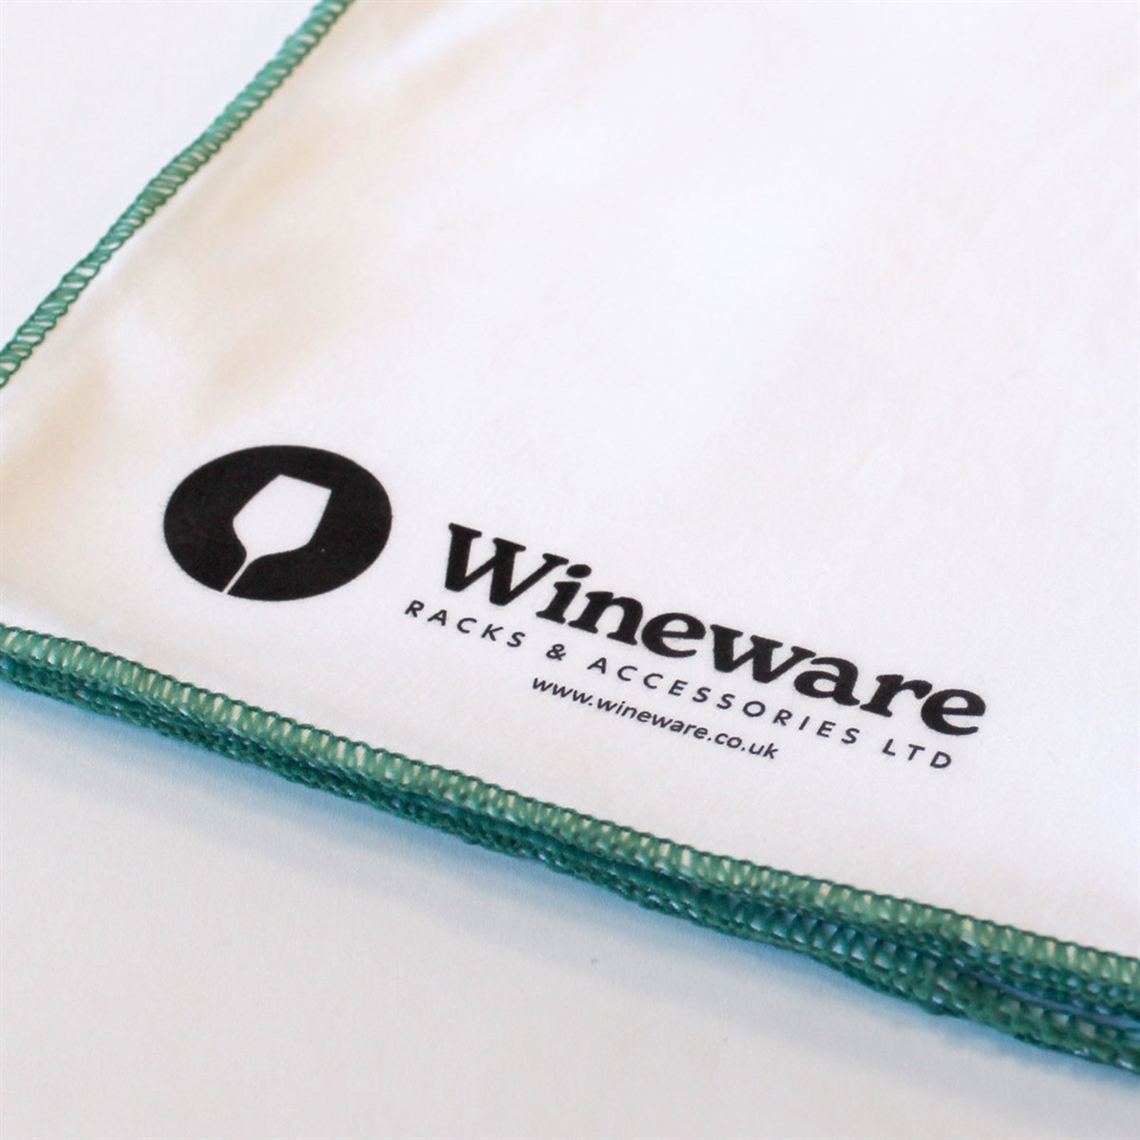 View more restaurant & trade glasses from our Wine Glass Cleaning & Accessories range